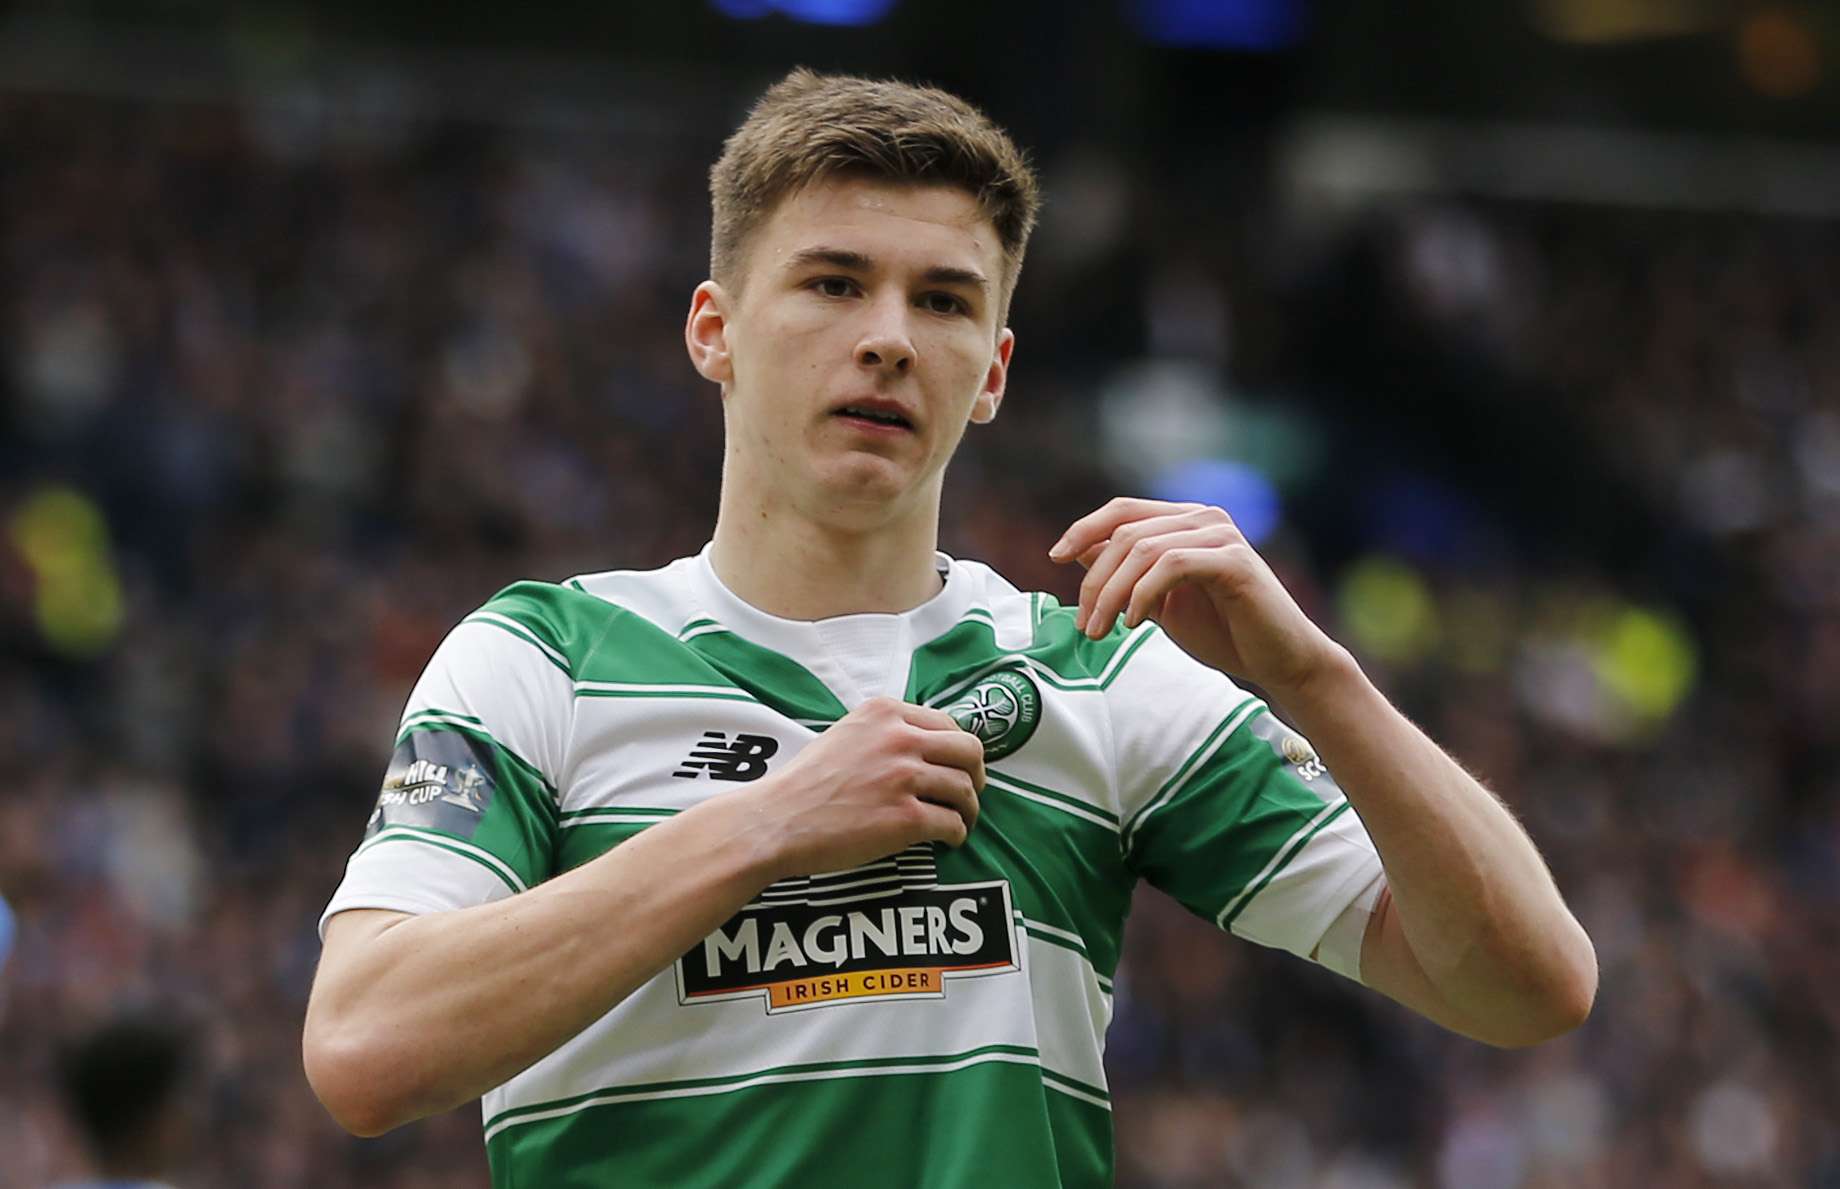 Arsenal target Kieran Tierney signs five-year contract extension with  Celtic